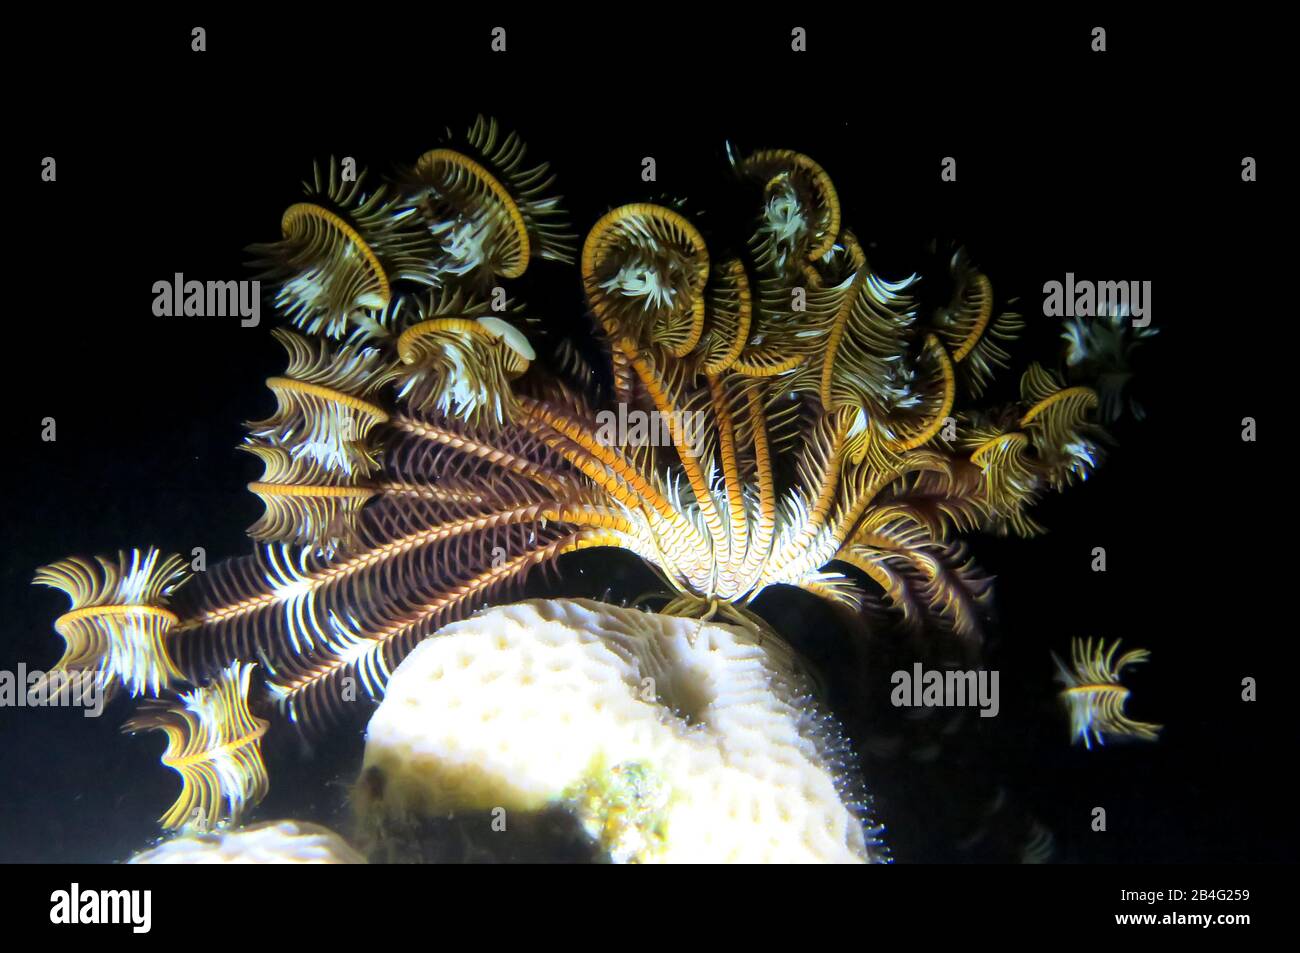 Federstern (Crinoidea), Îles Brother, Rotes Meer, Aegypten / Ägypten Banque D'Images